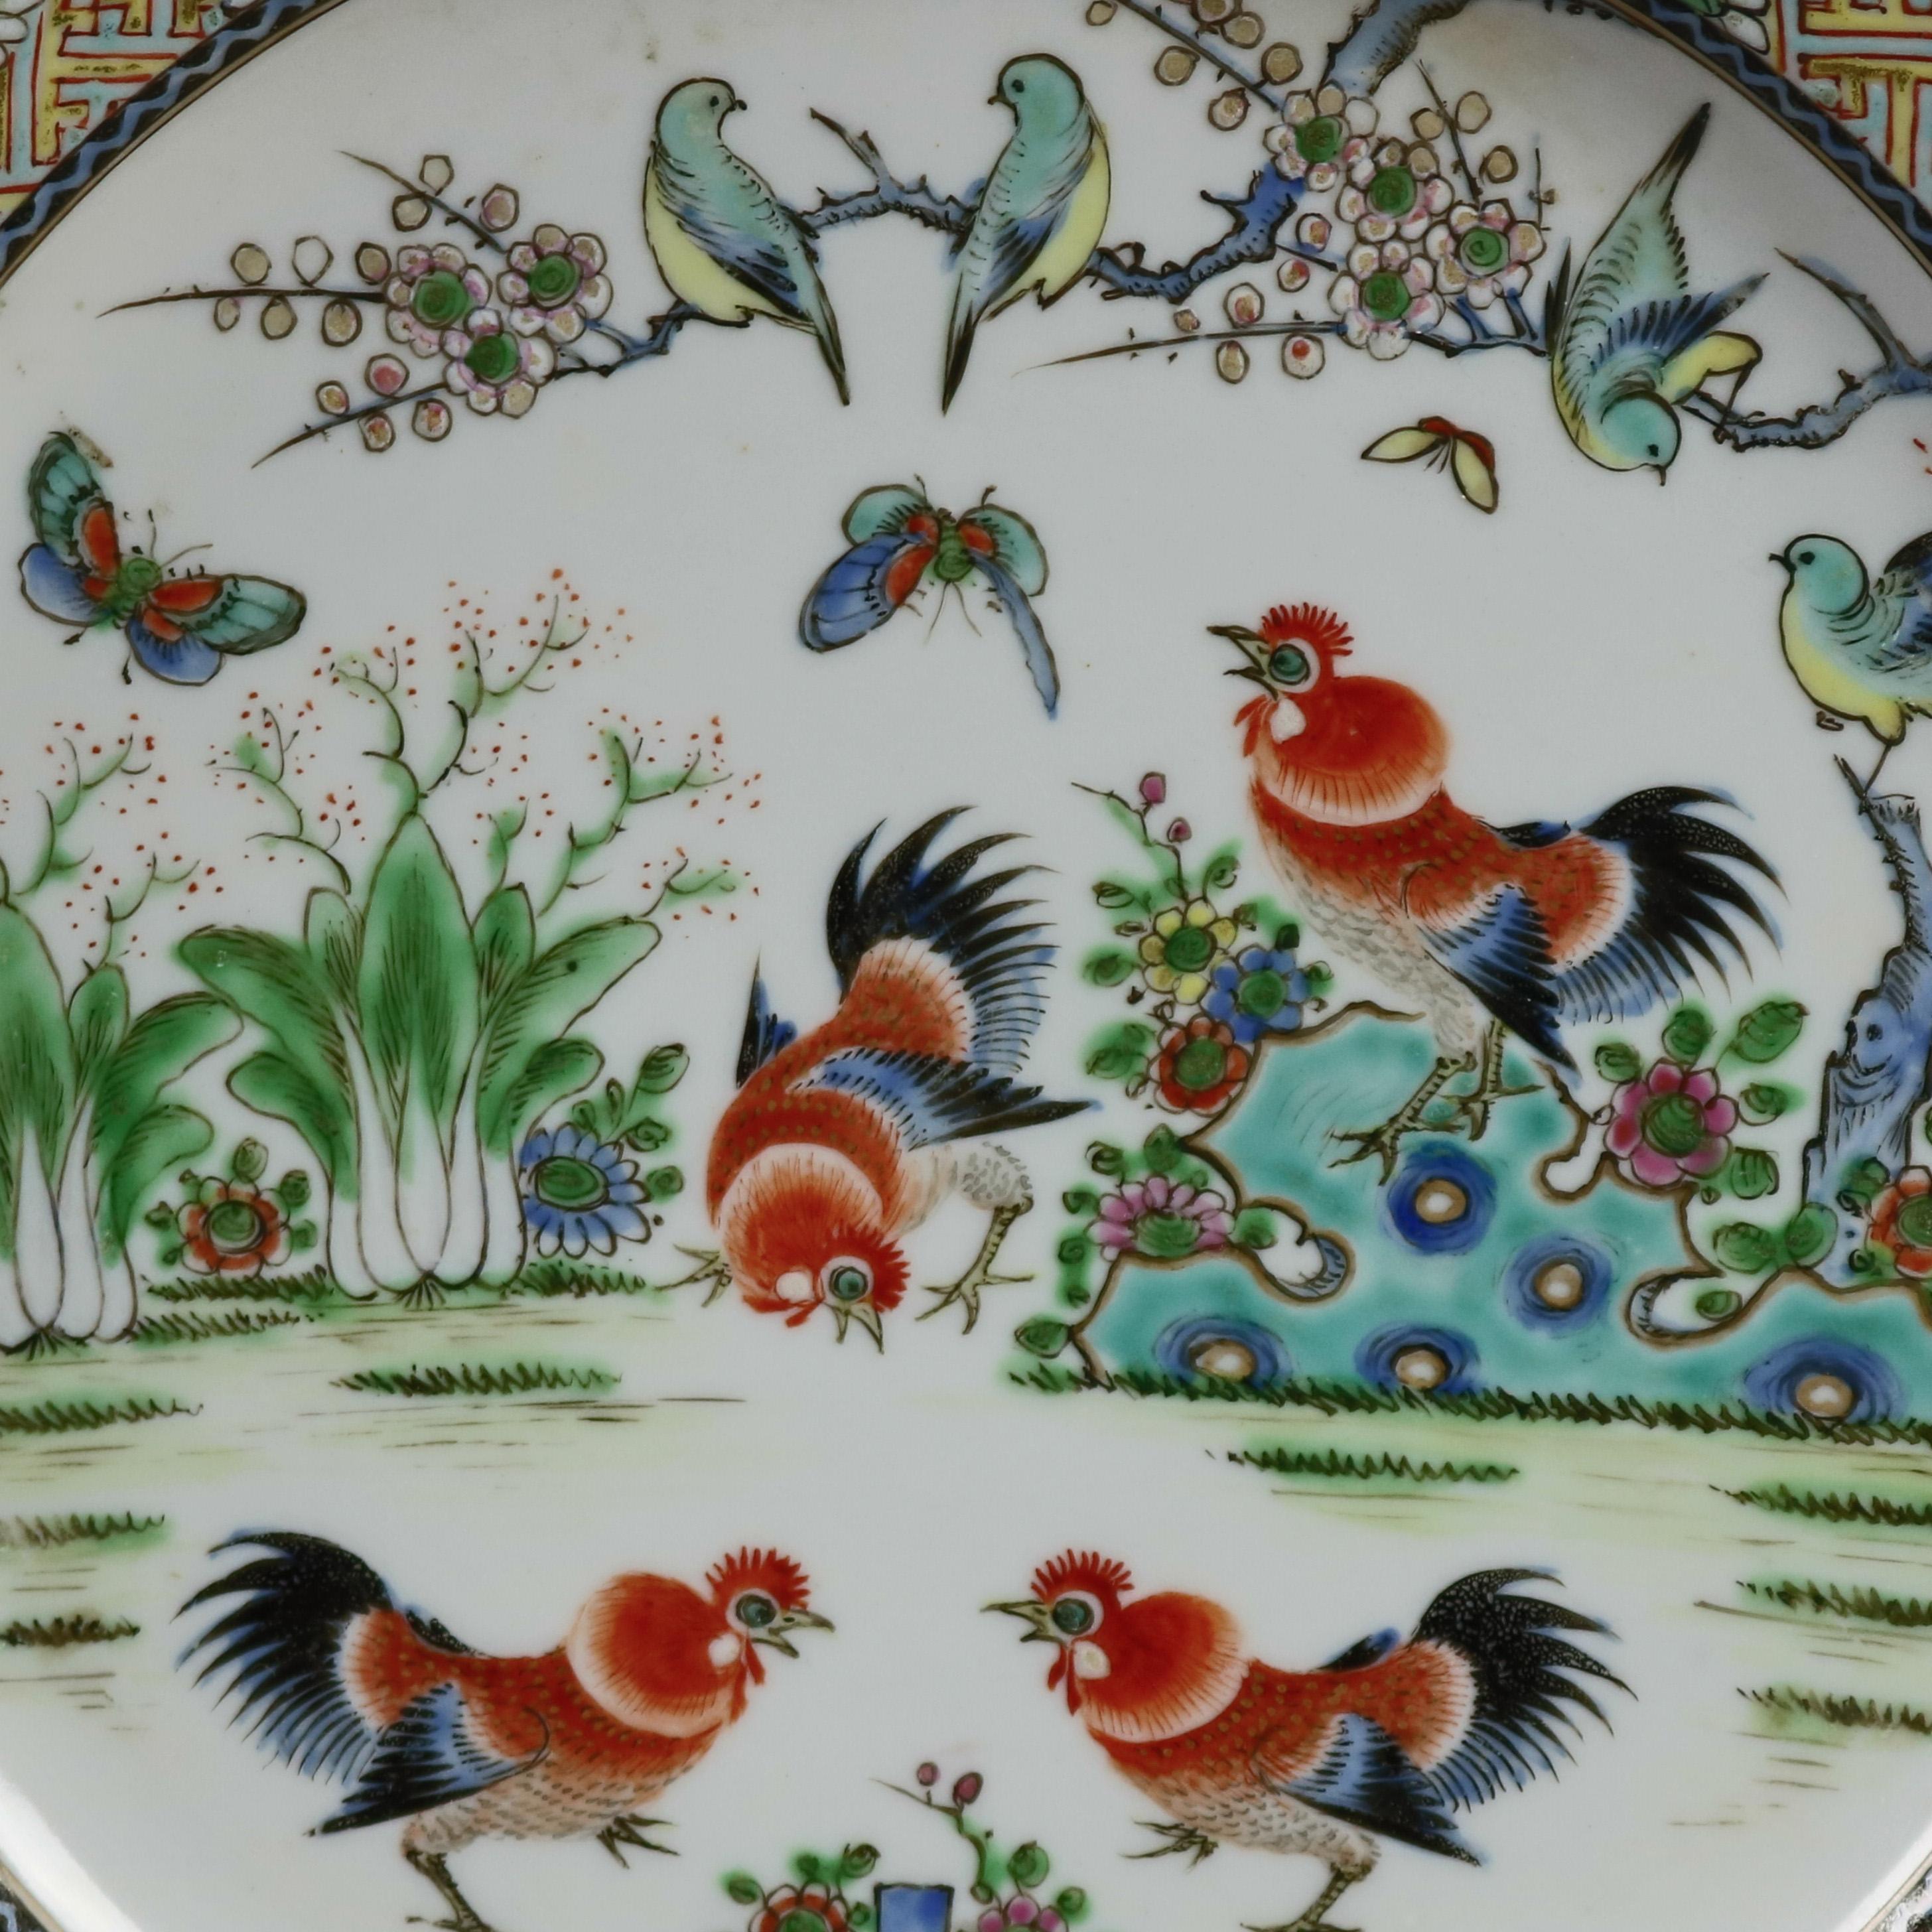 A pair of Chinese hand enameled pictorial plates offer central garden scene with roosters, birds and butterflies, rim having basket weave border with foliate reserves, 19th century

***DELIVERY NOTICE – Due to COVID-19 we are employing NO-CONTACT